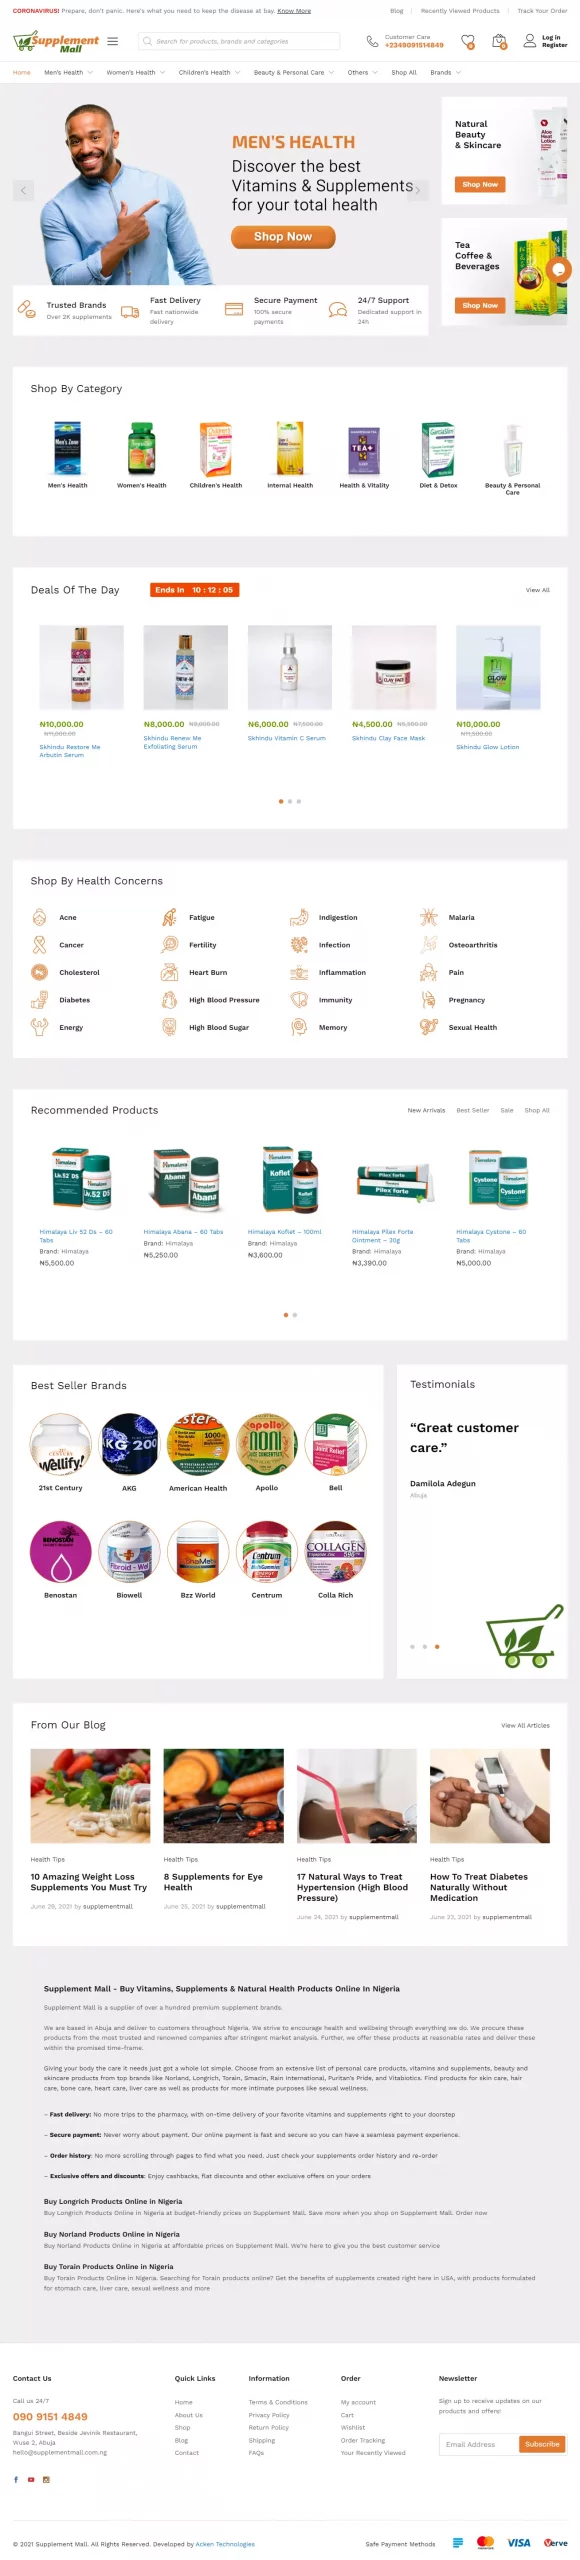 Supplement Mll supplementmall.com .ng homepage scaled